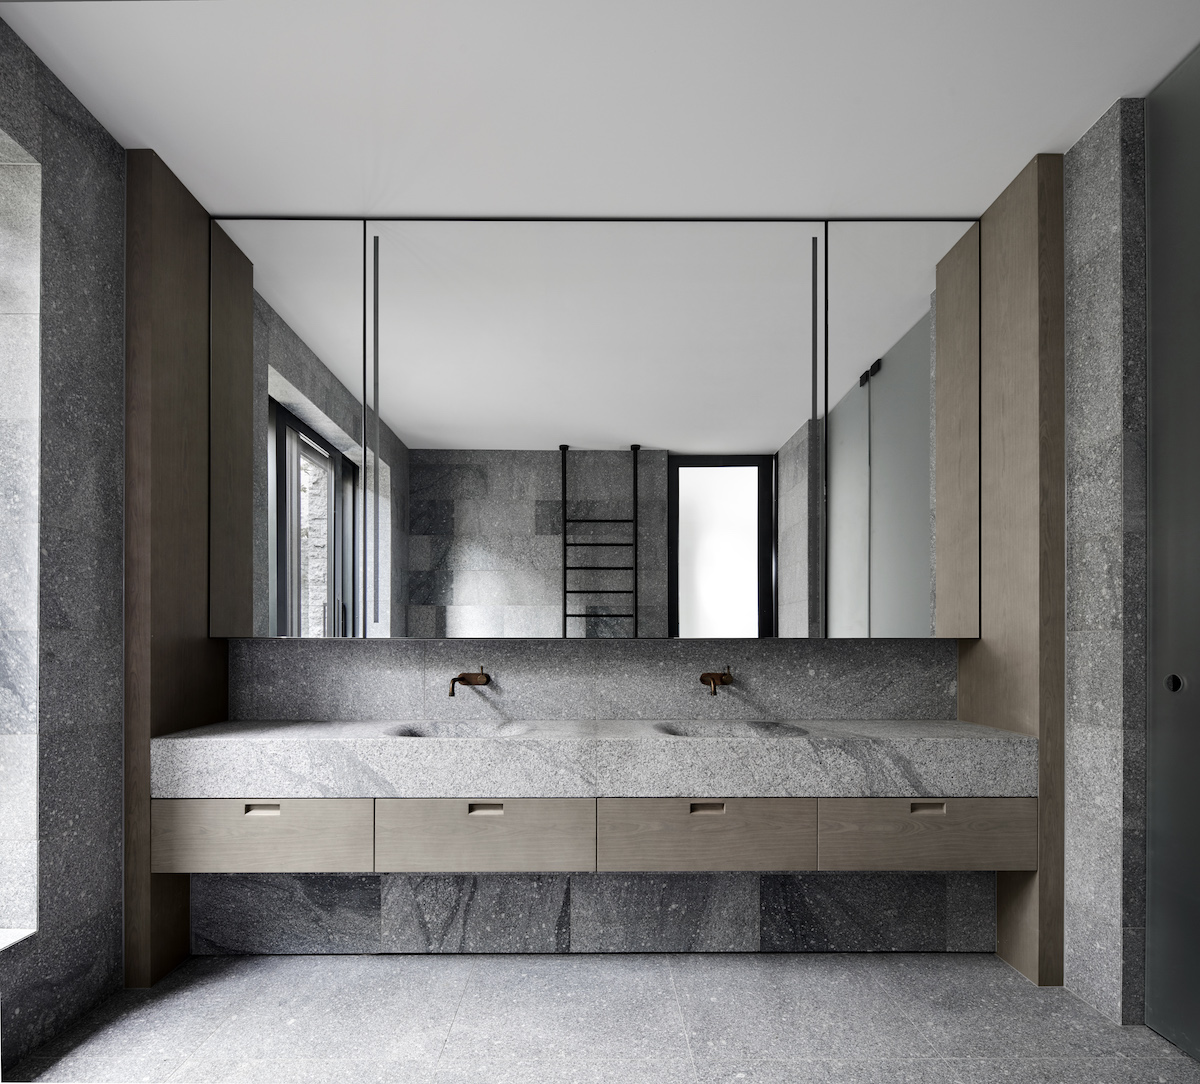 Bathroom by B.E architecture featuring Eco Outdoor Fallow Granite and limed walnut joinery